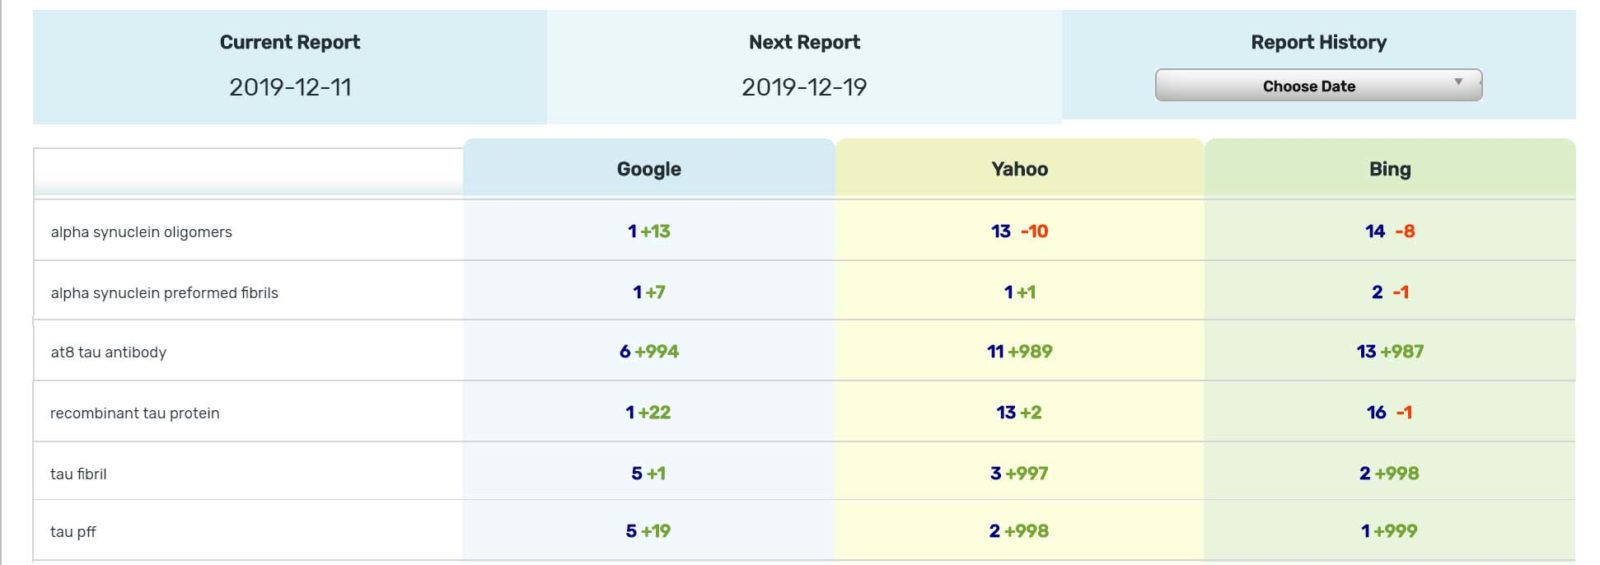 Sample keyword report displaying 6 examples of keywords ranking on the first page